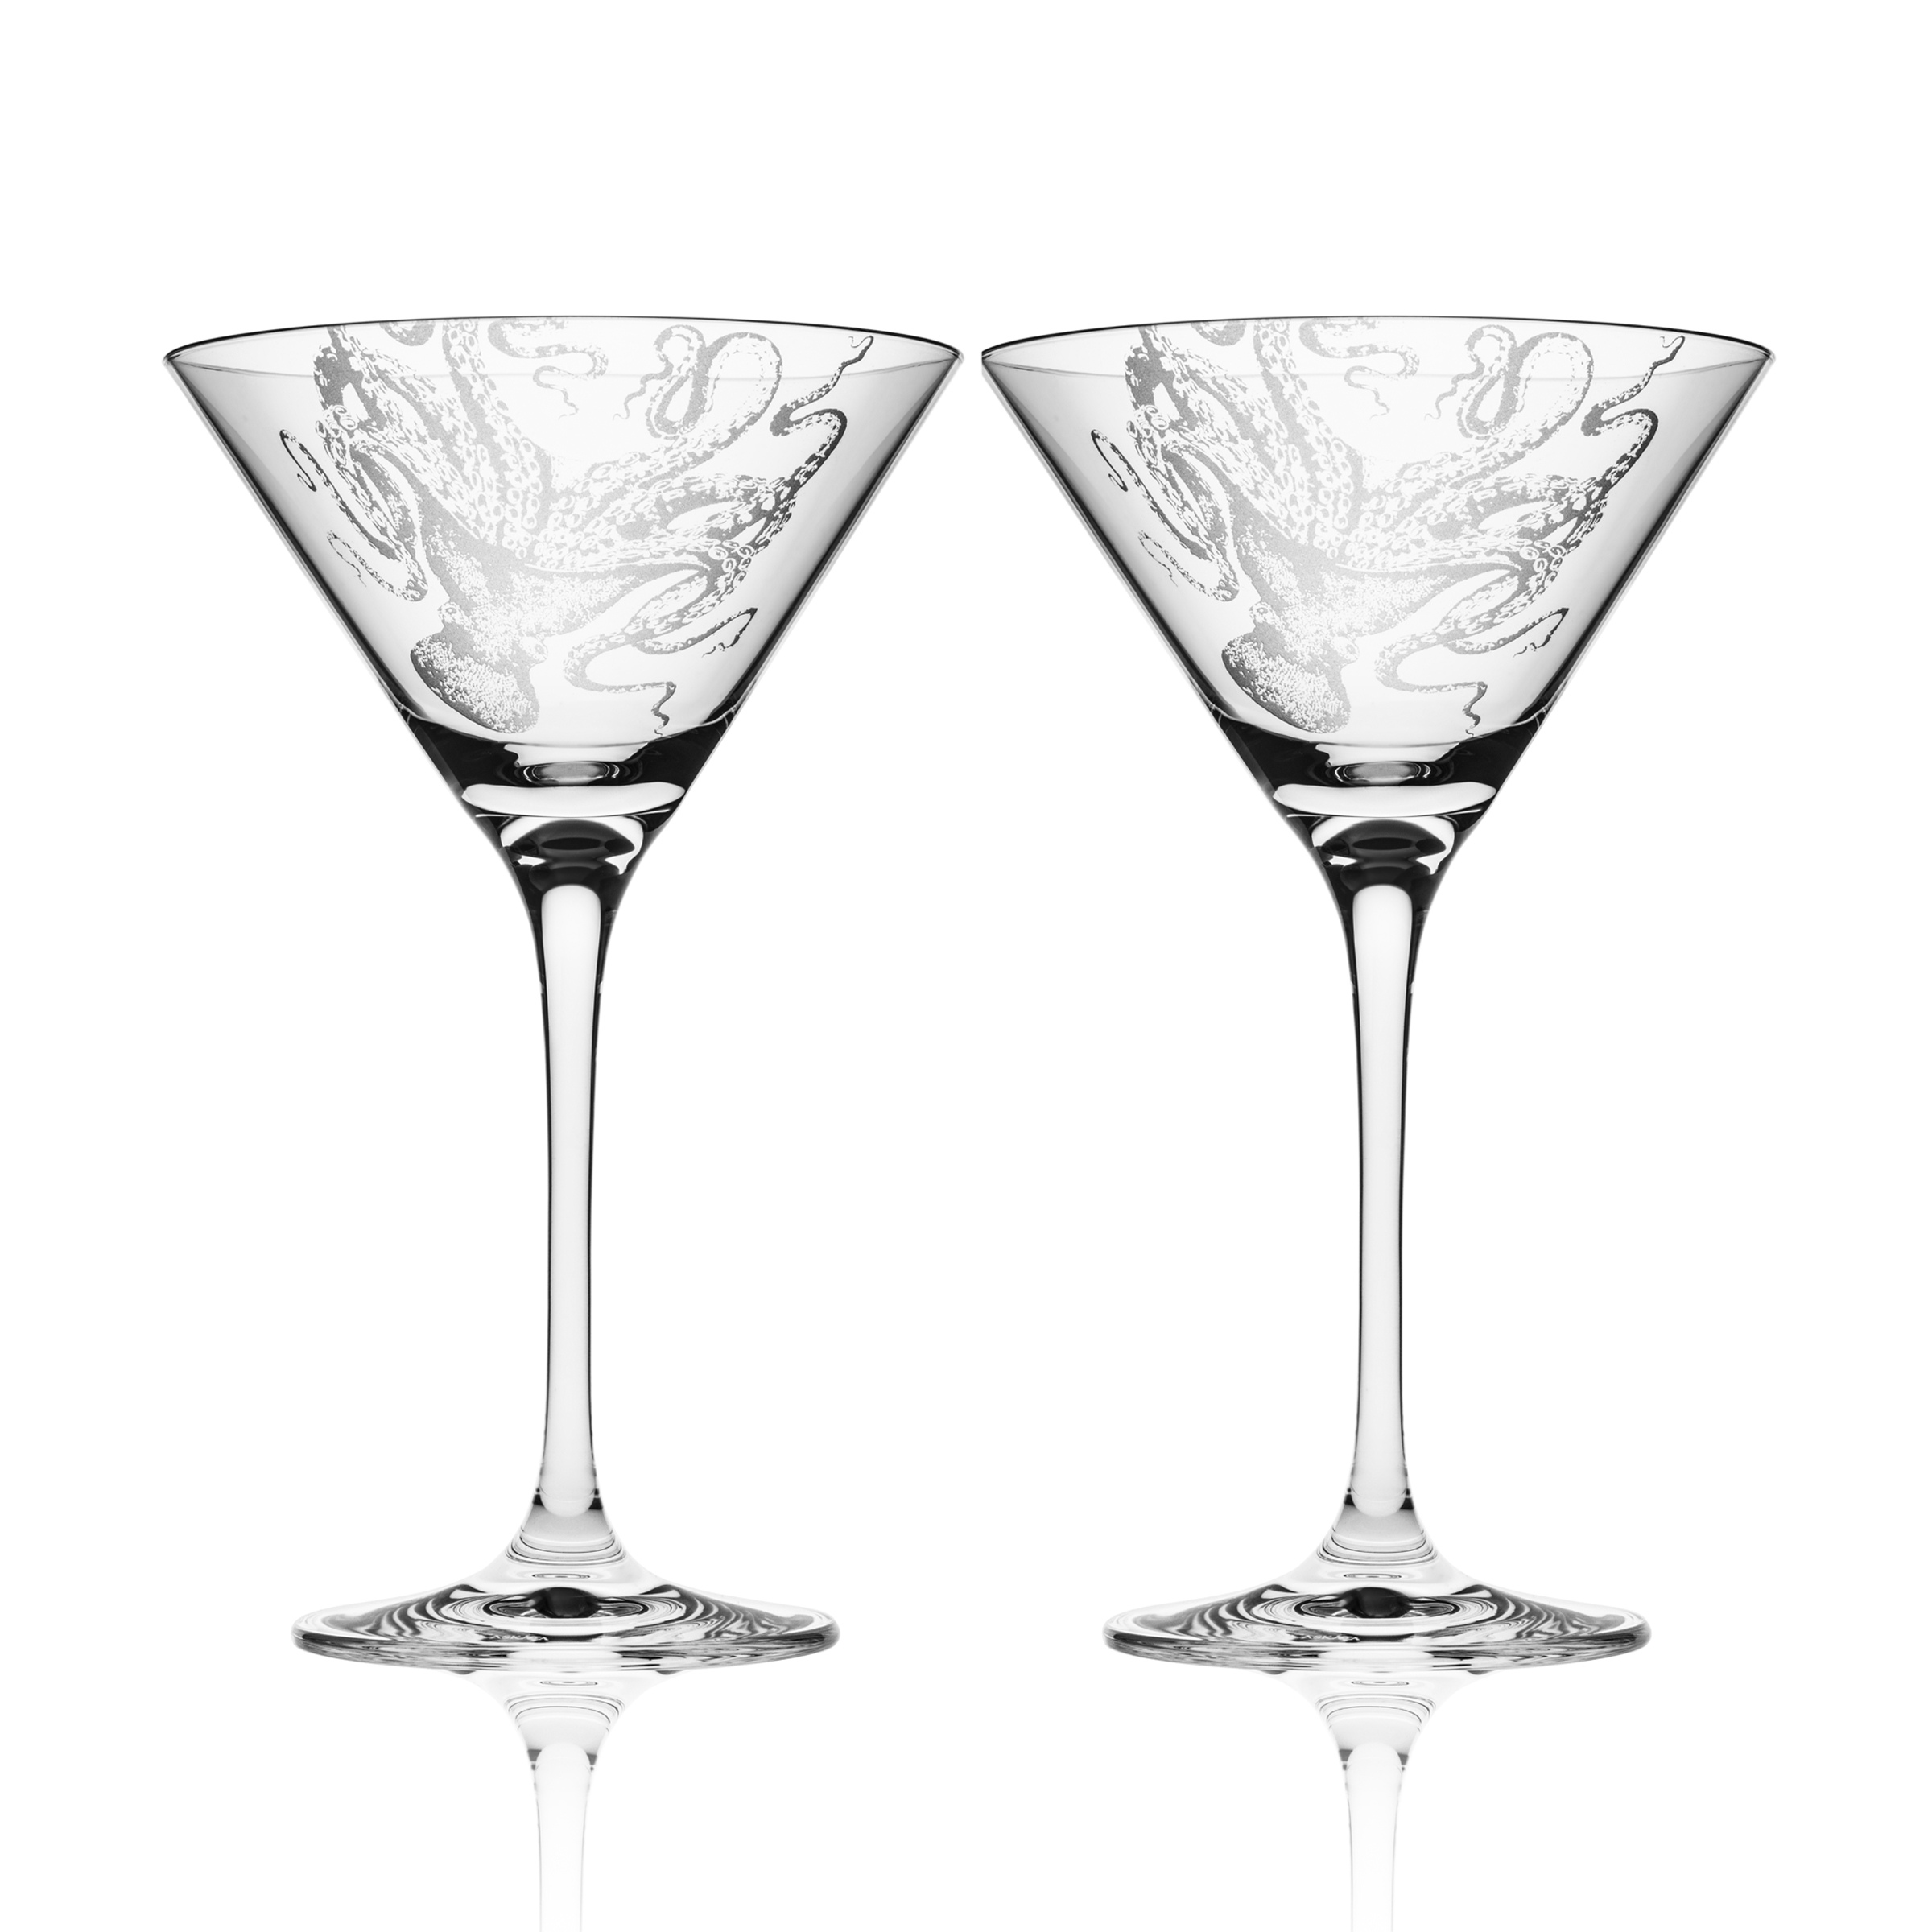 Lucy Martini Glasses, Set of 2 - Matterns Floral